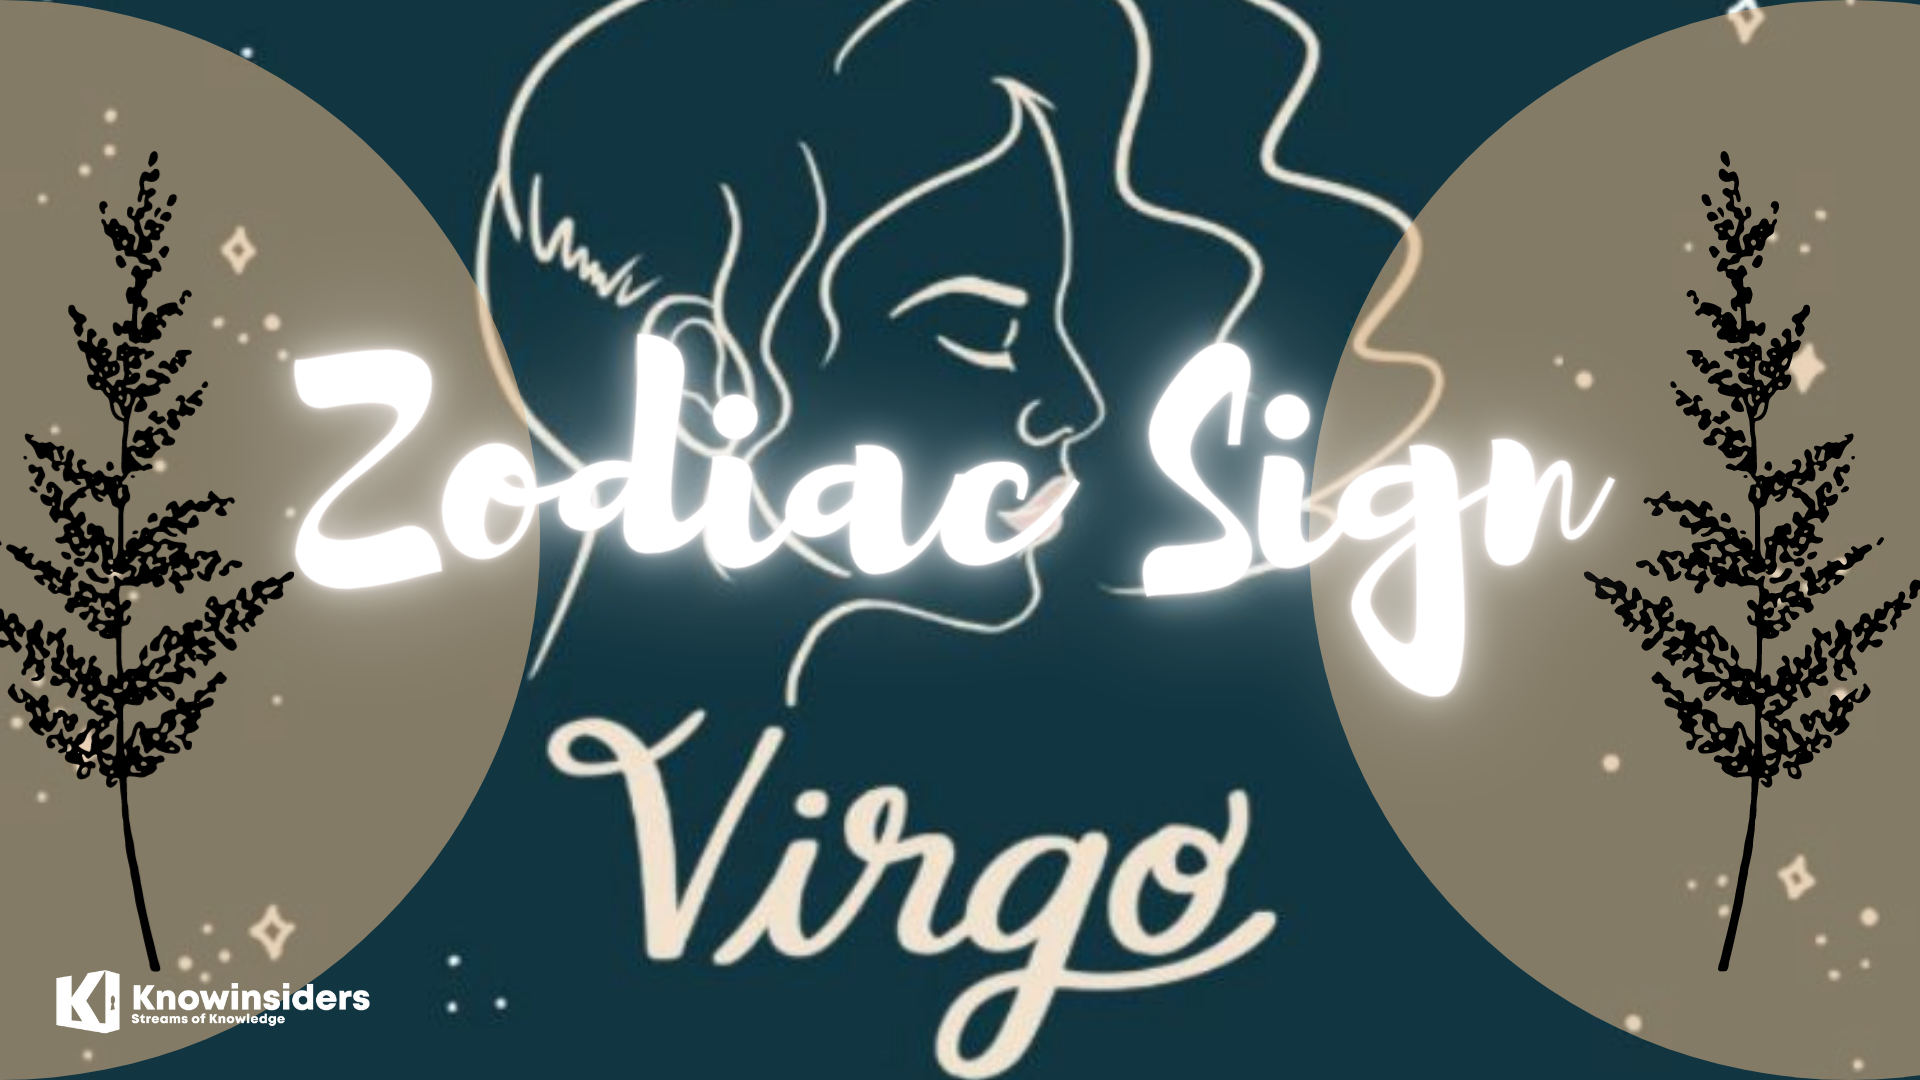 VIRGO Yearly Horoscope 2022: Prediction for Health, Travel and Education